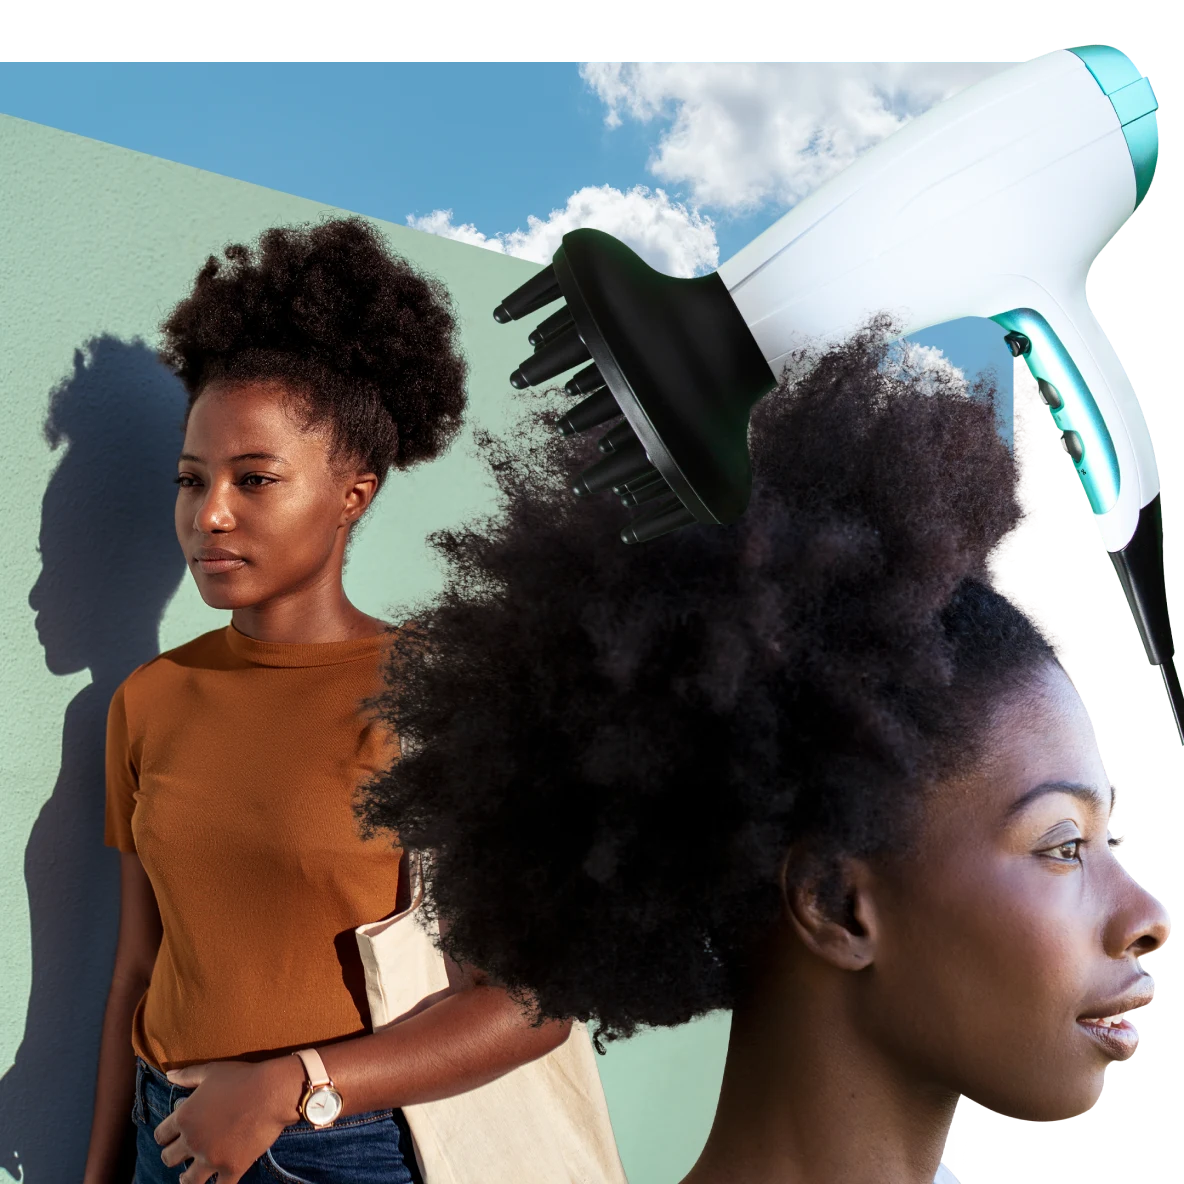 Two Black women with natural hair, are against a light green backdrop. The woman on the left is wearing a beige top, with the woman on the right standing under a white hairdryer. Blue sky and white clouds are in the background.